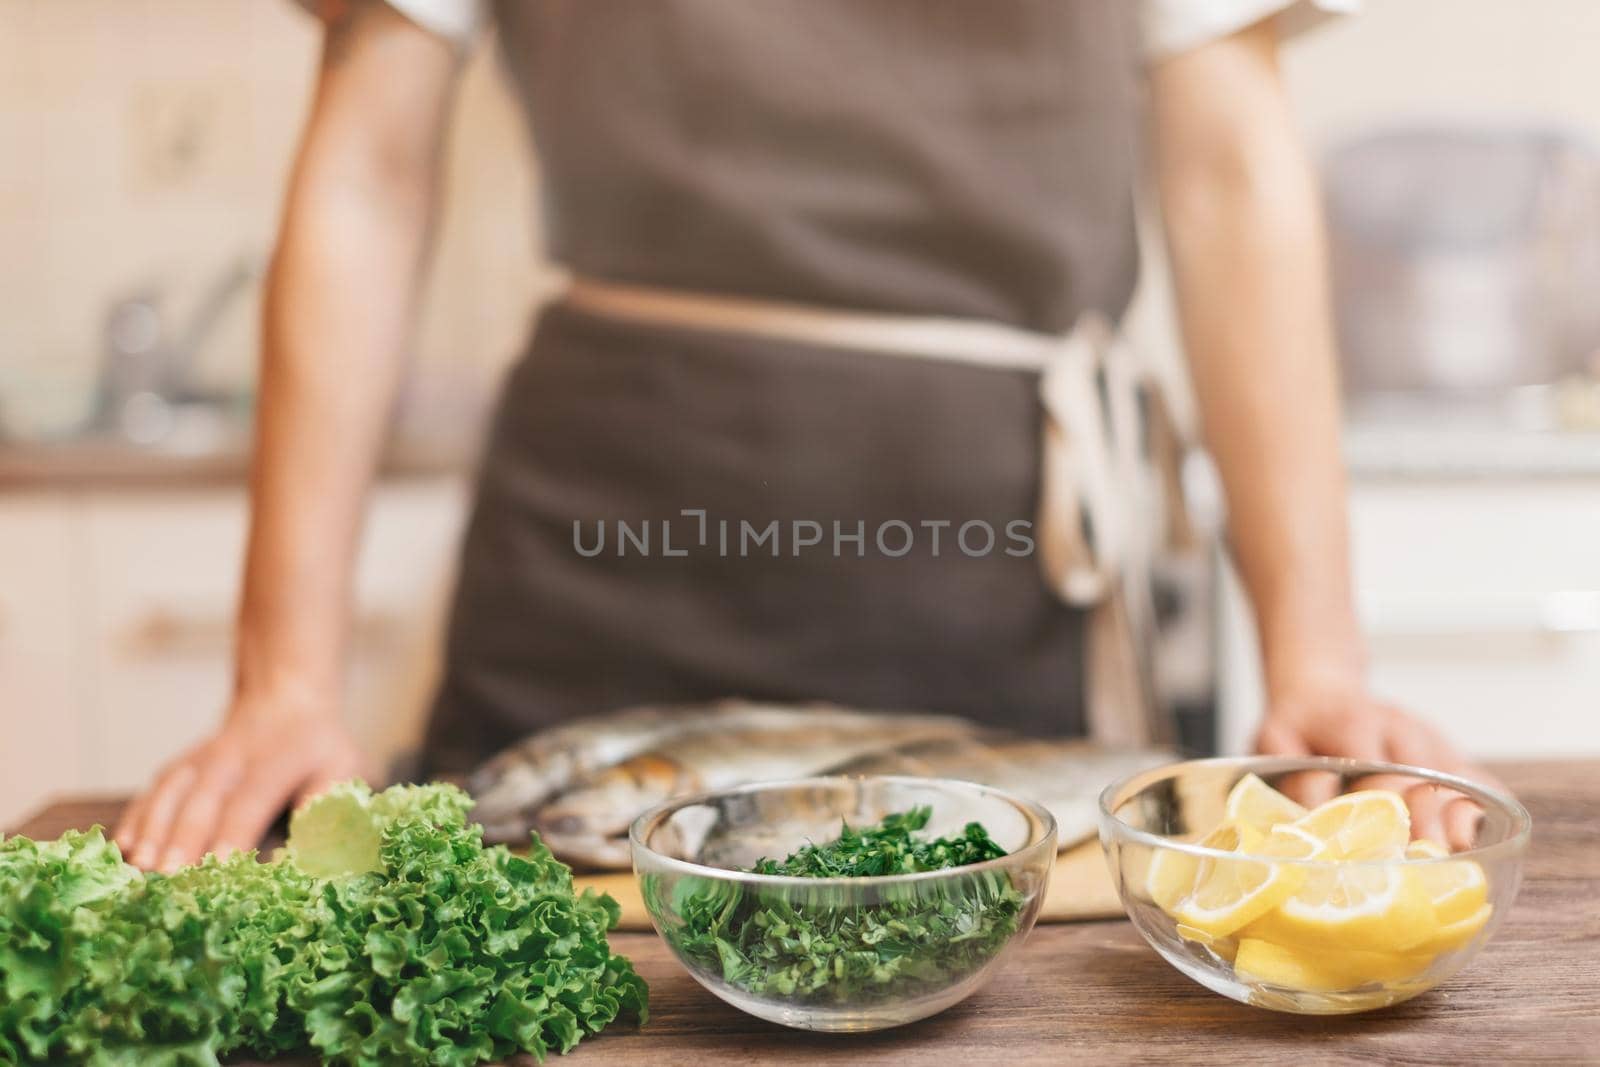 Woman cooking in the kitchen, ingredients for fish dish on wooden table. Focus on foreground.